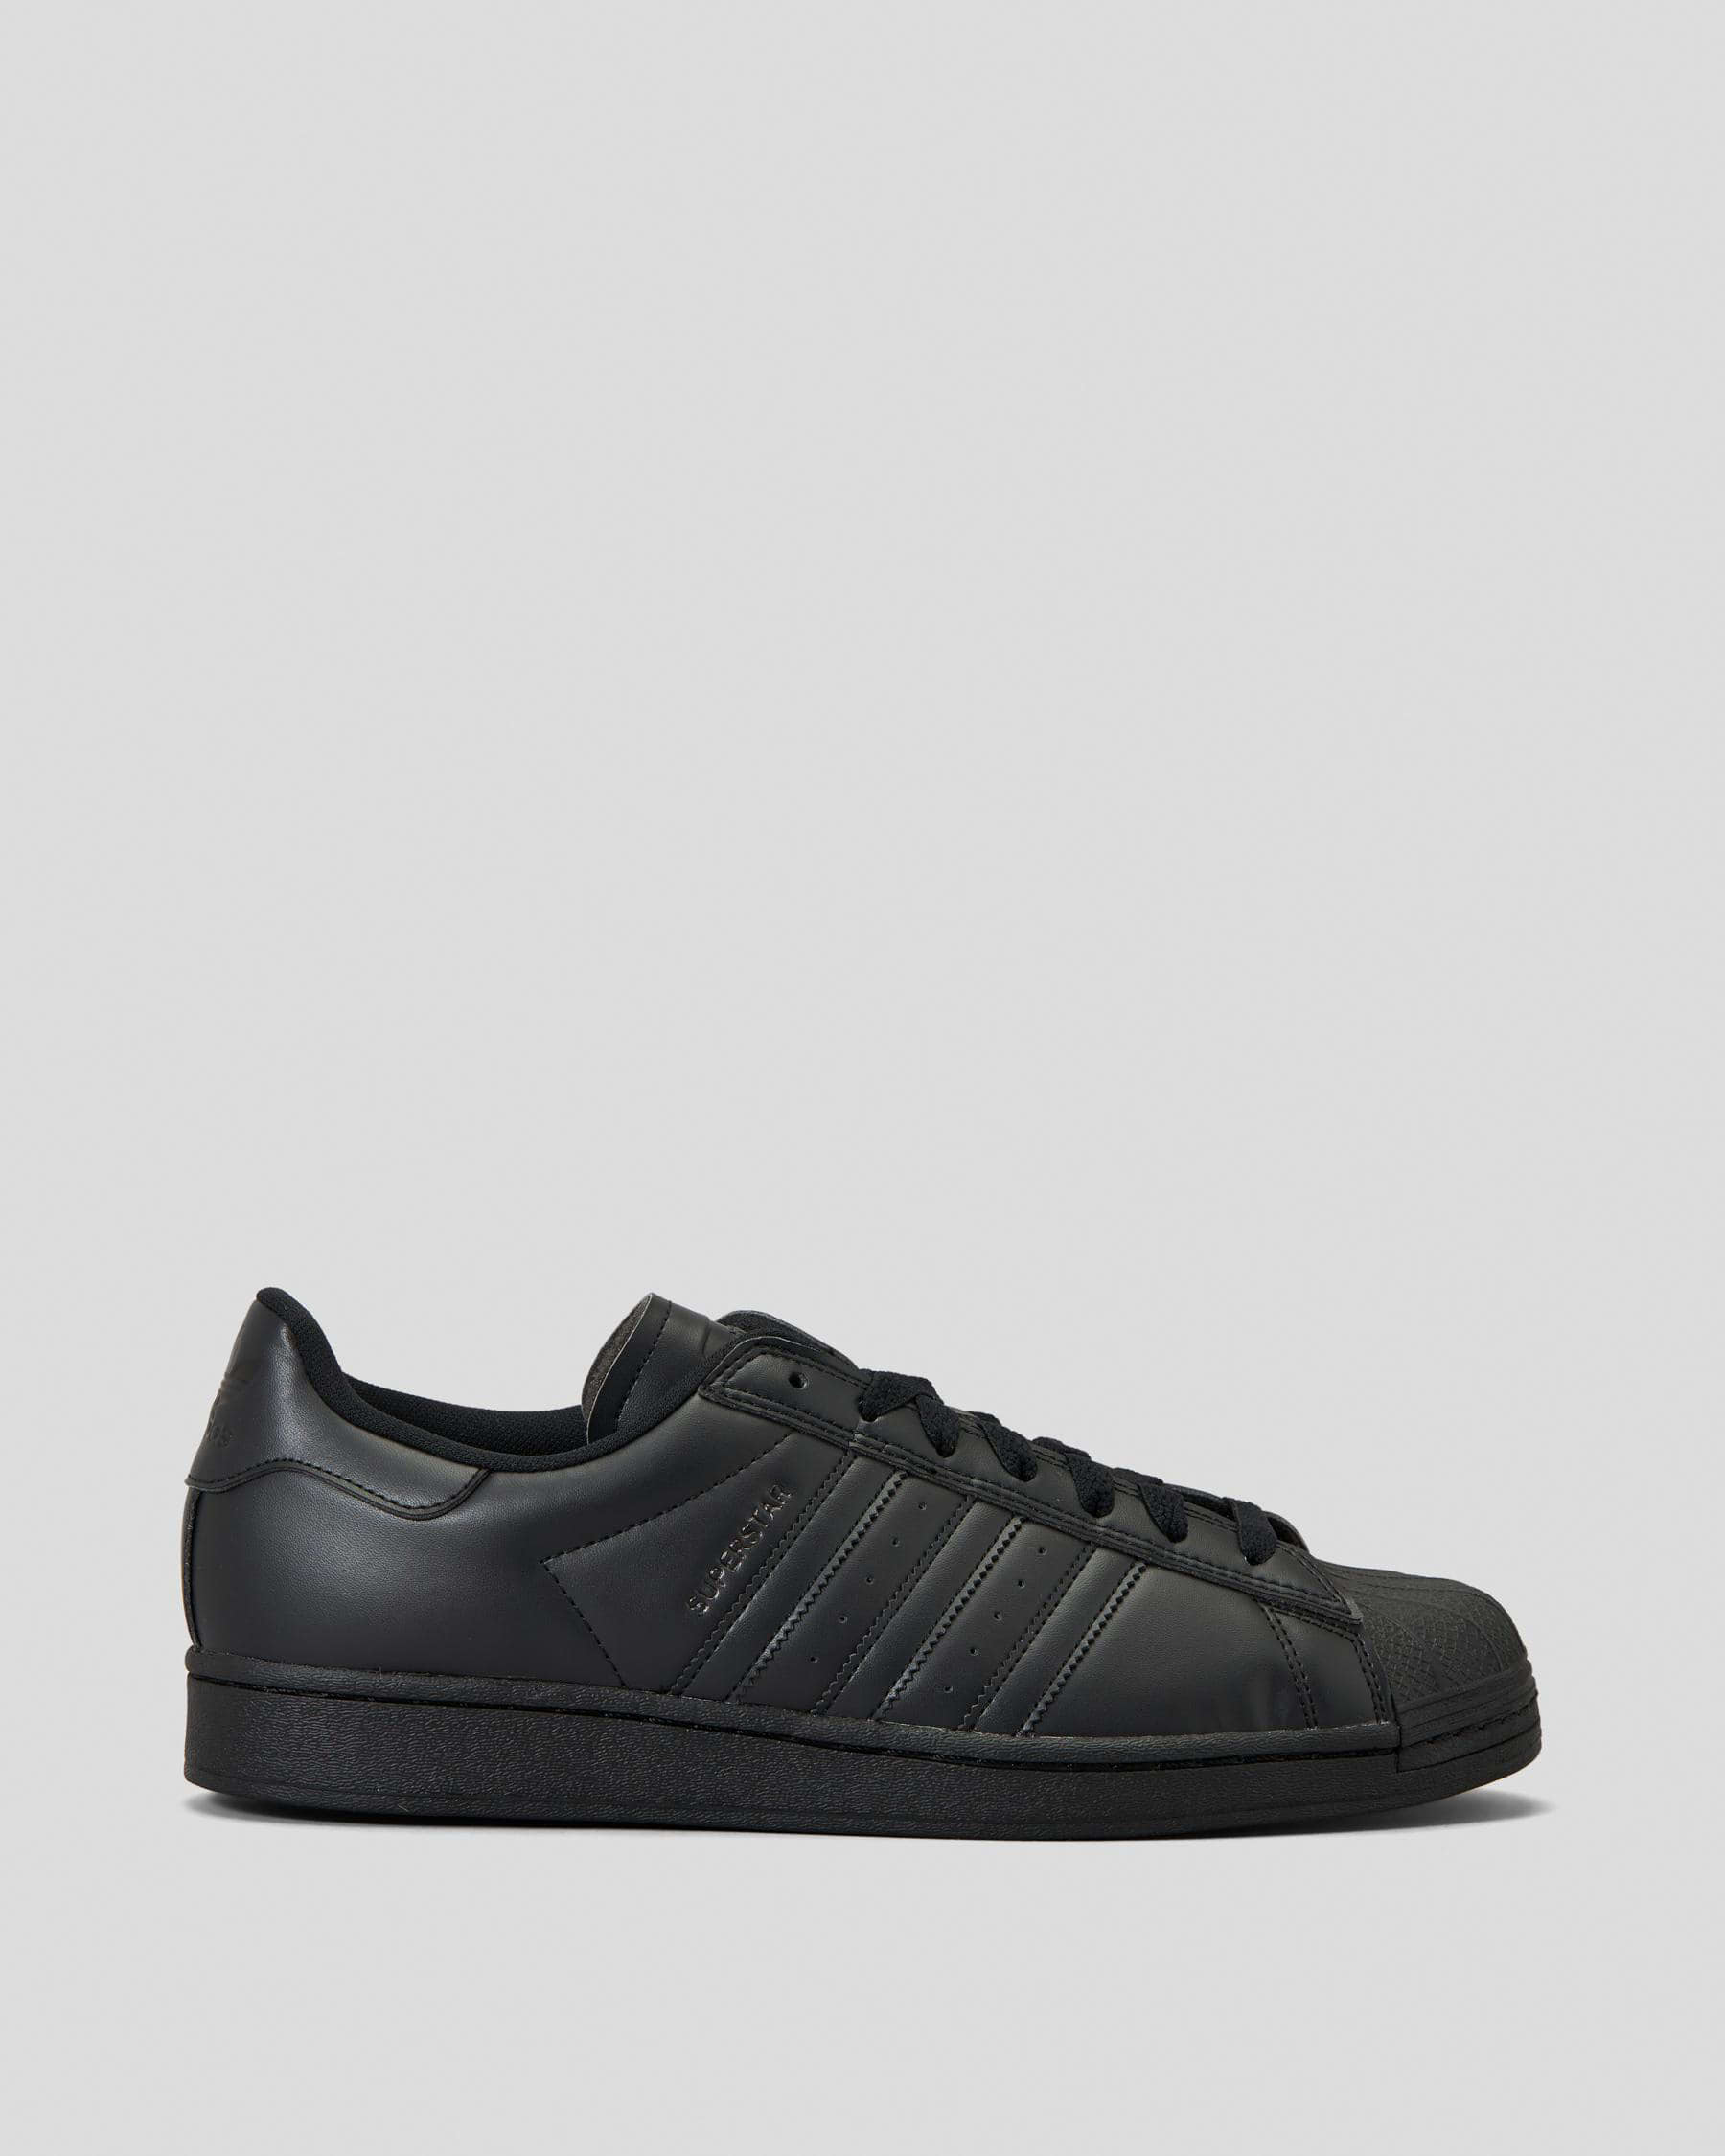 Shop adidas Superstar Adv Shoes In Core Black/core Black/gold Met ...